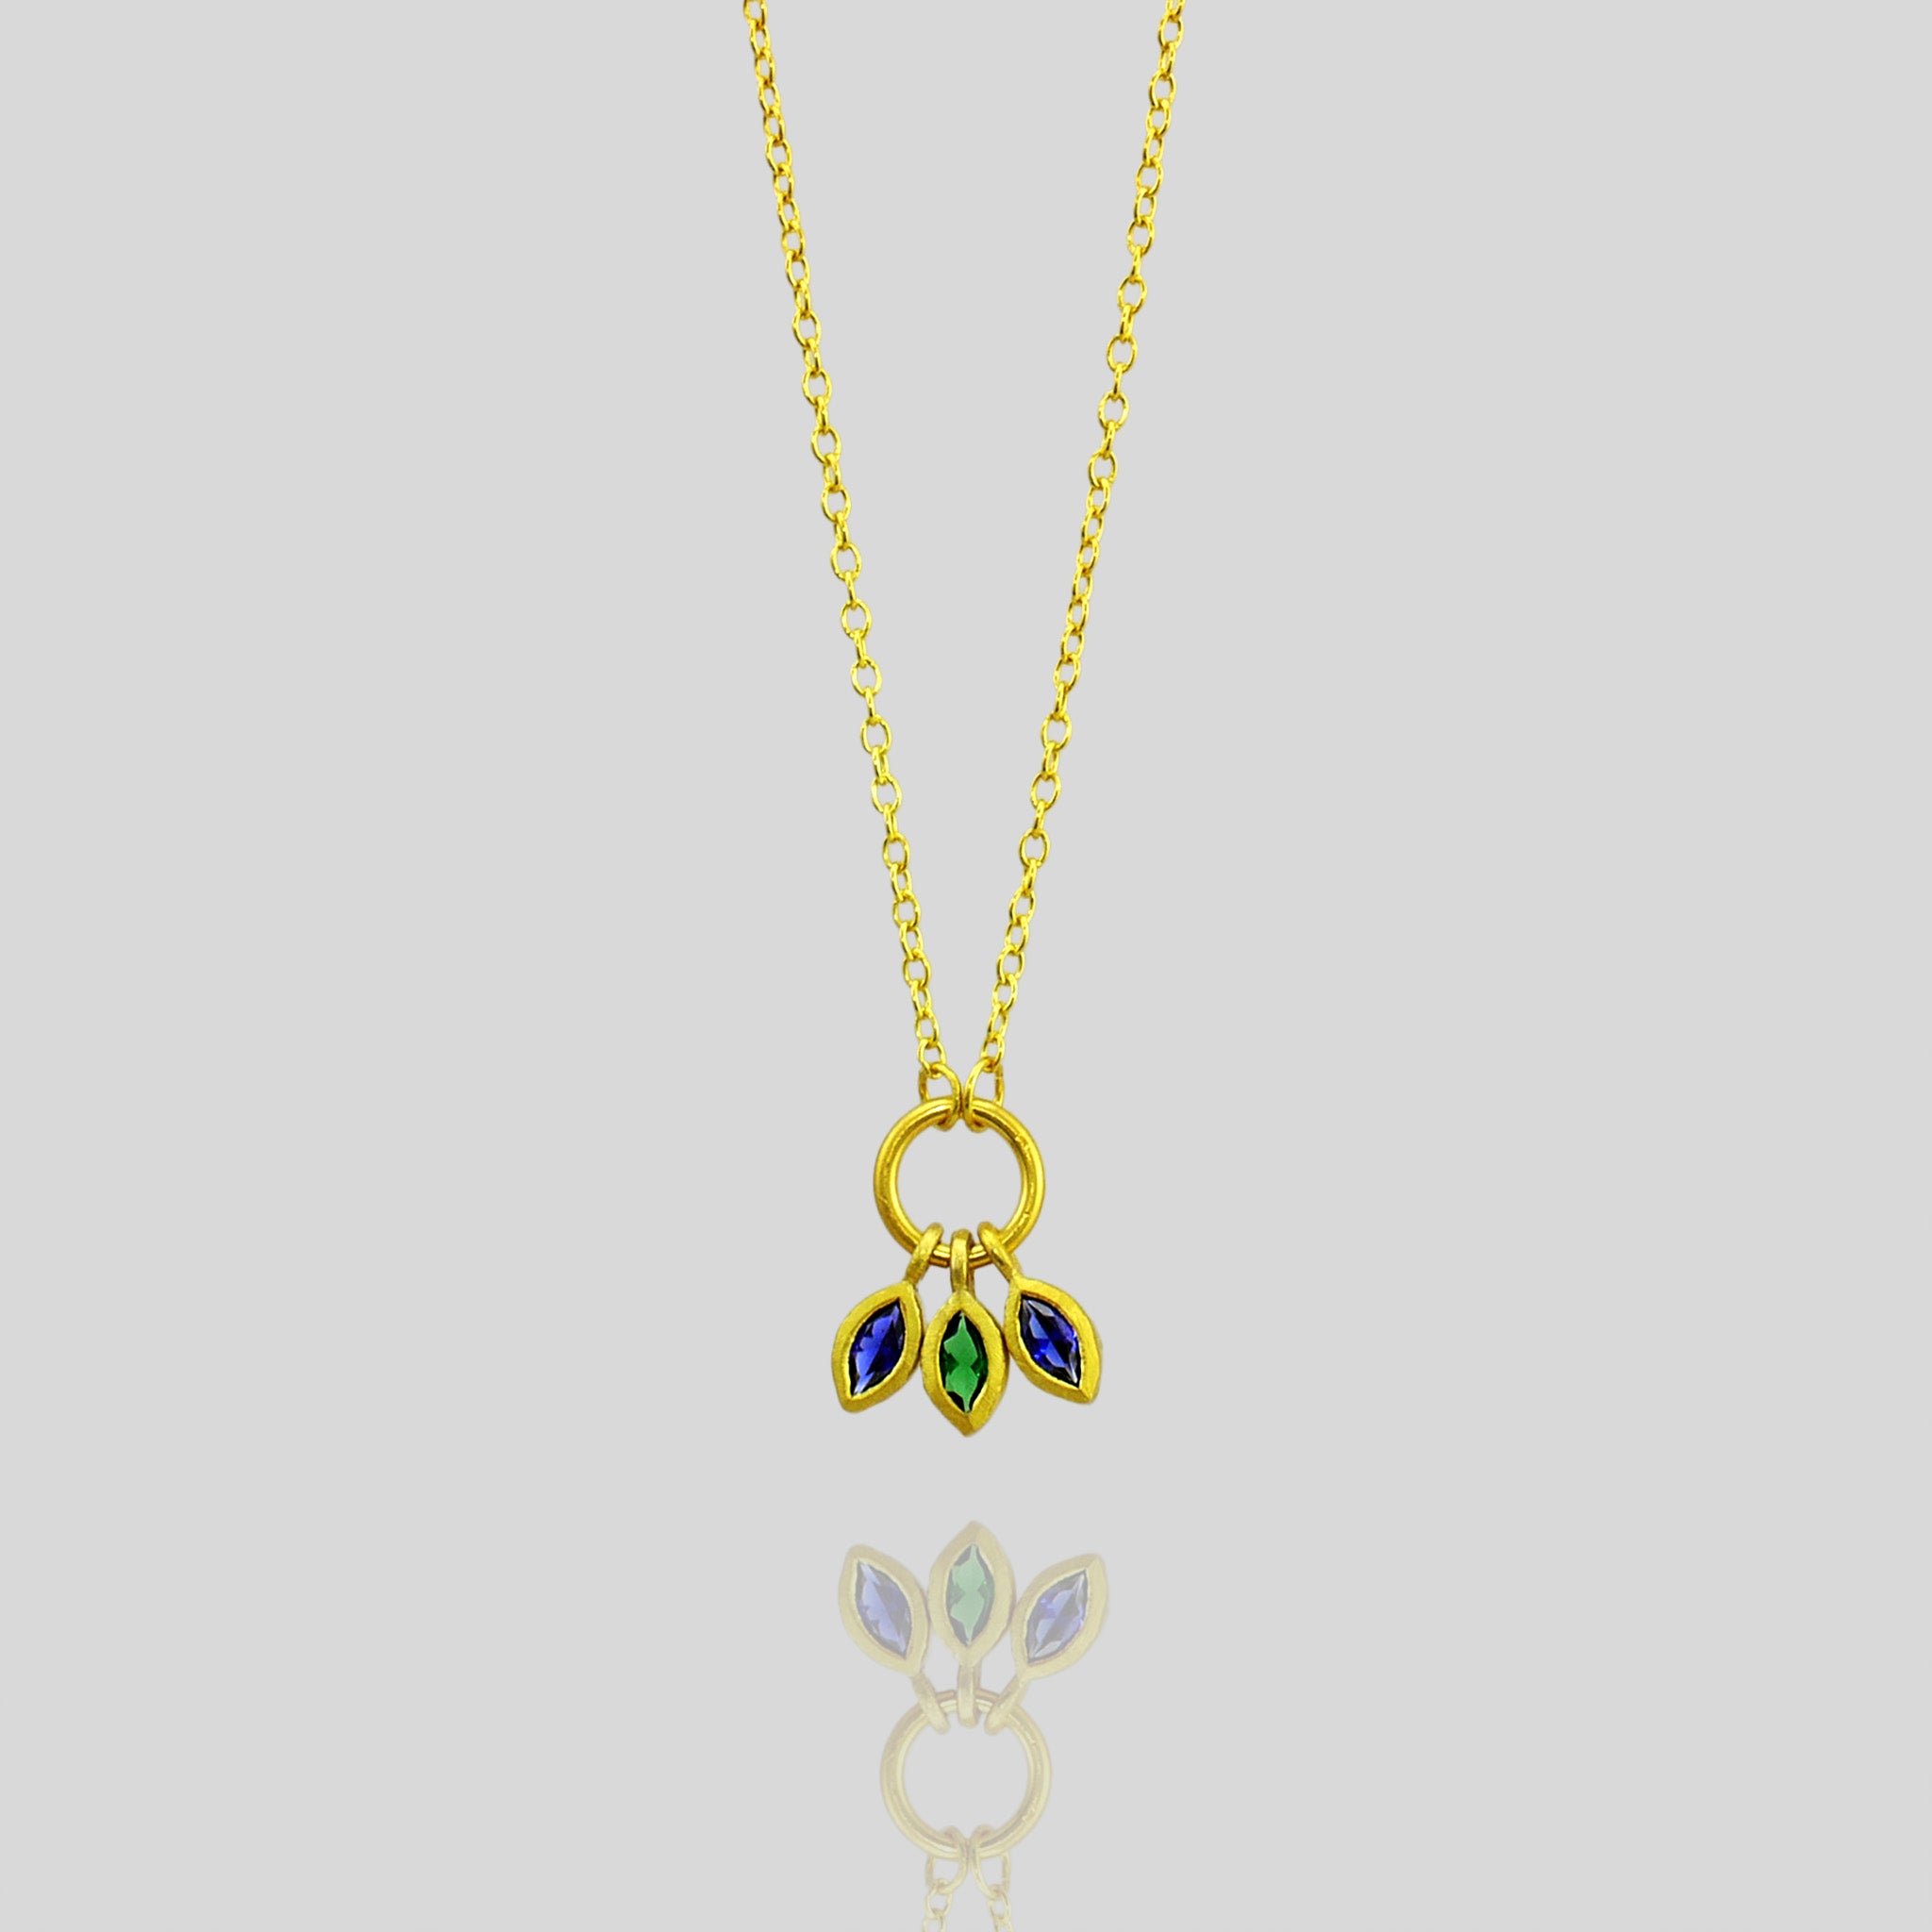 Close up of an 18k Gold Marquee pendant with three precisely cut gemstones, an emerald and two sapphires, combining to offer a vibrant mix of color and elegance.